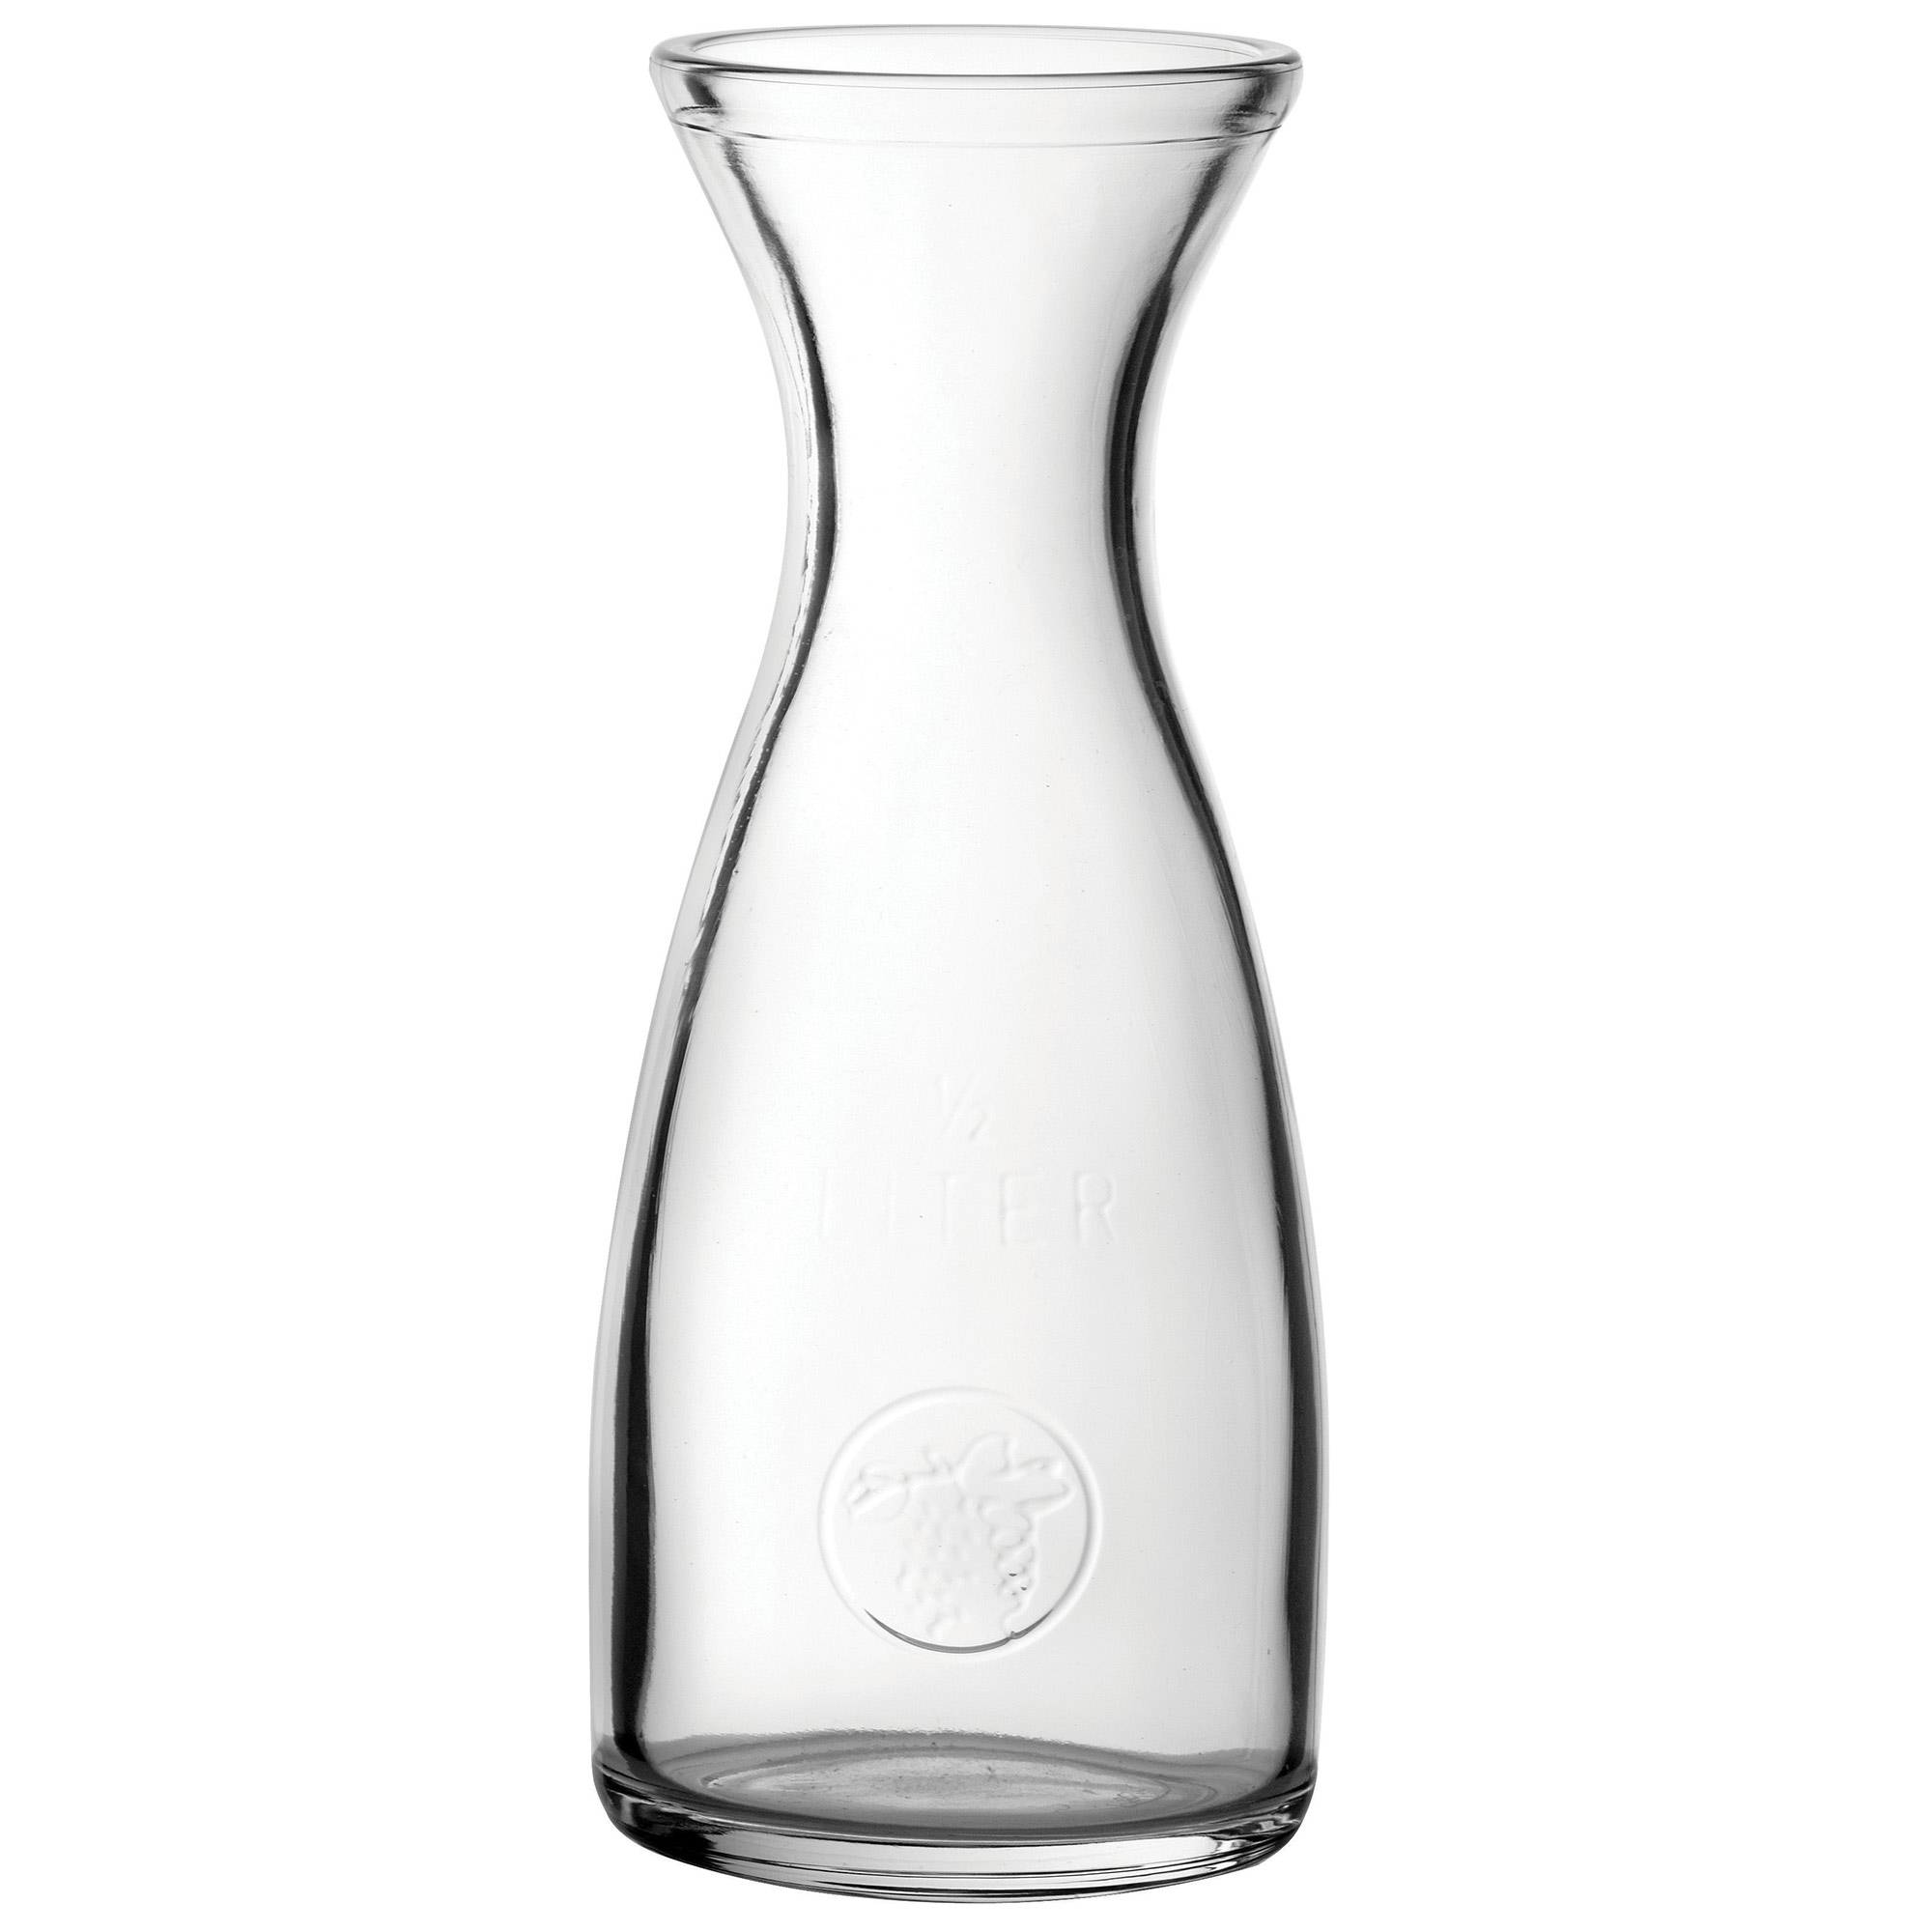 Learning & School Toys Toys & Games Carafe and glasses etna.com.pe